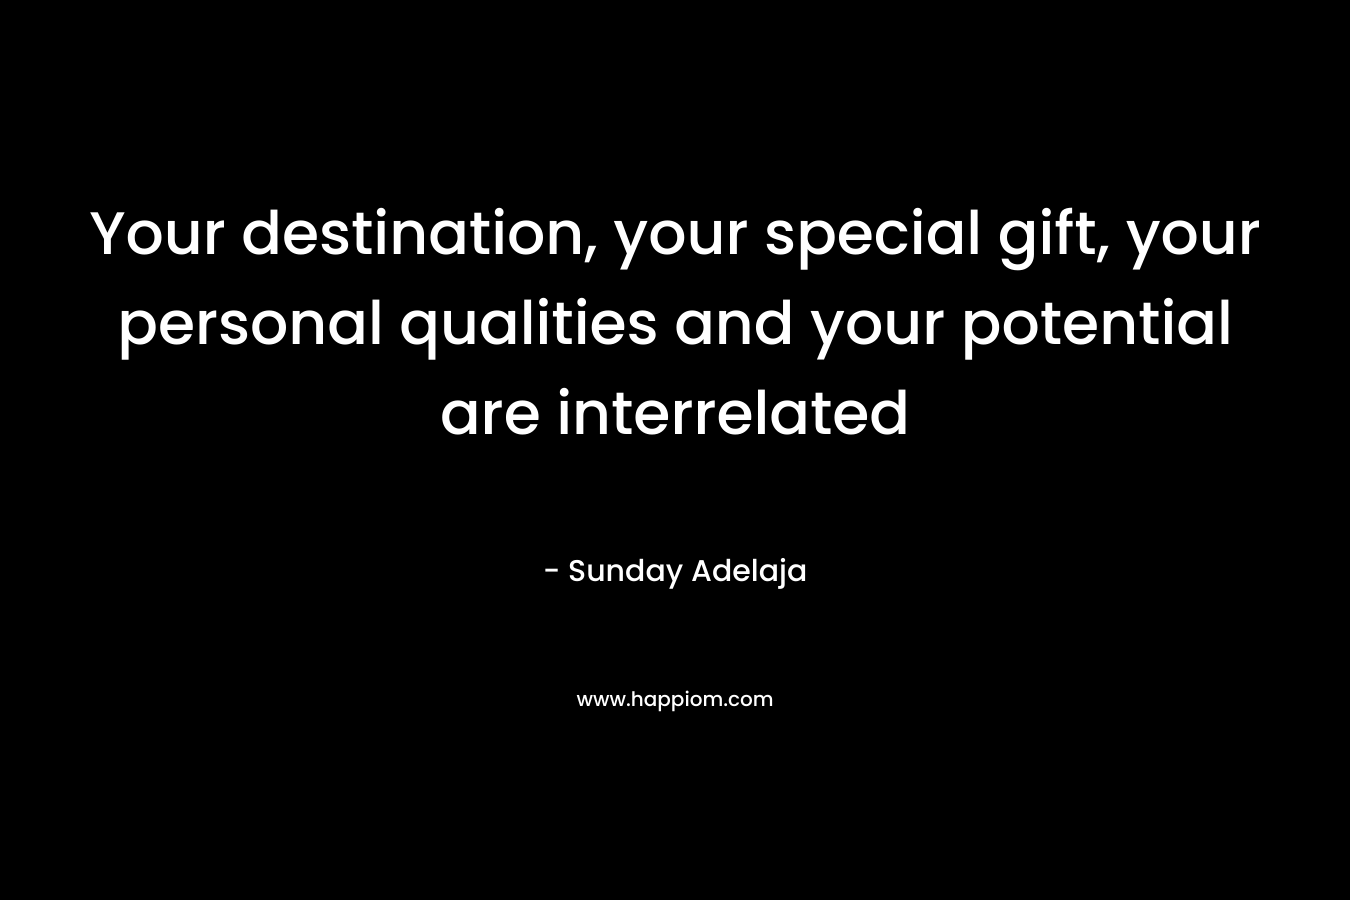 Your destination, your special gift, your personal qualities and your potential are interrelated